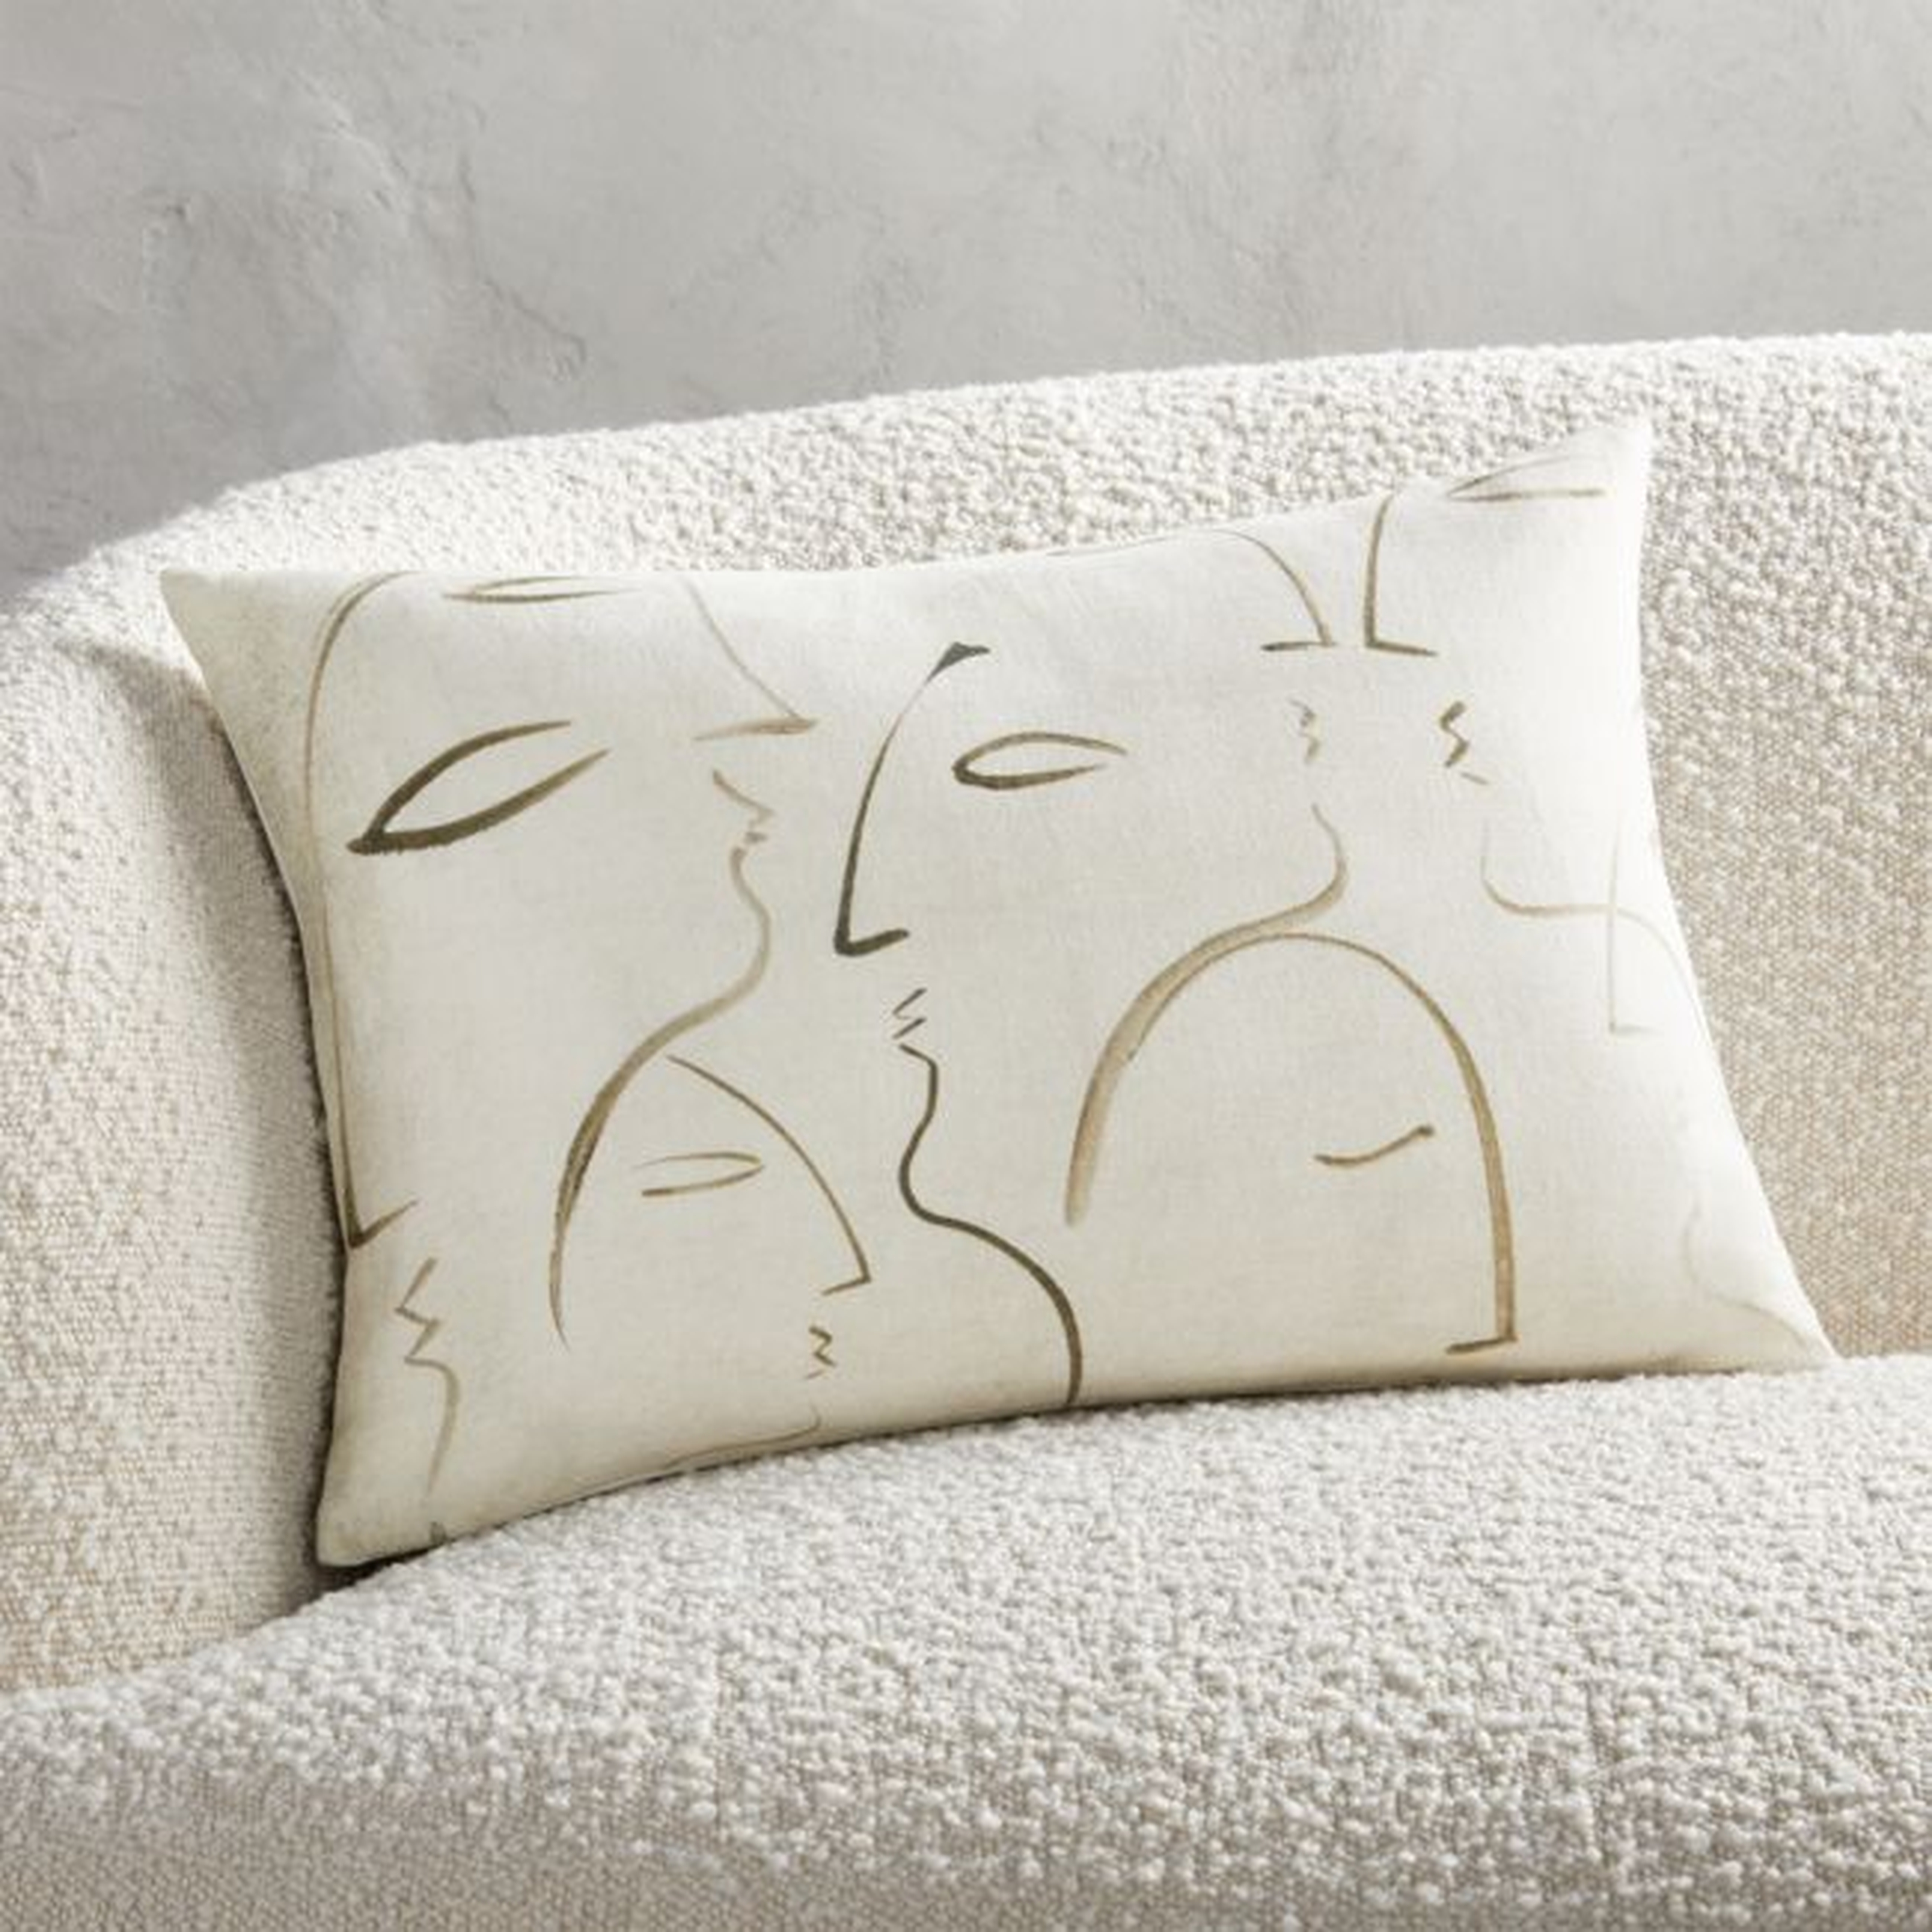 18"x12" Silhouette Pillow with Feather-Down Insert - CB2